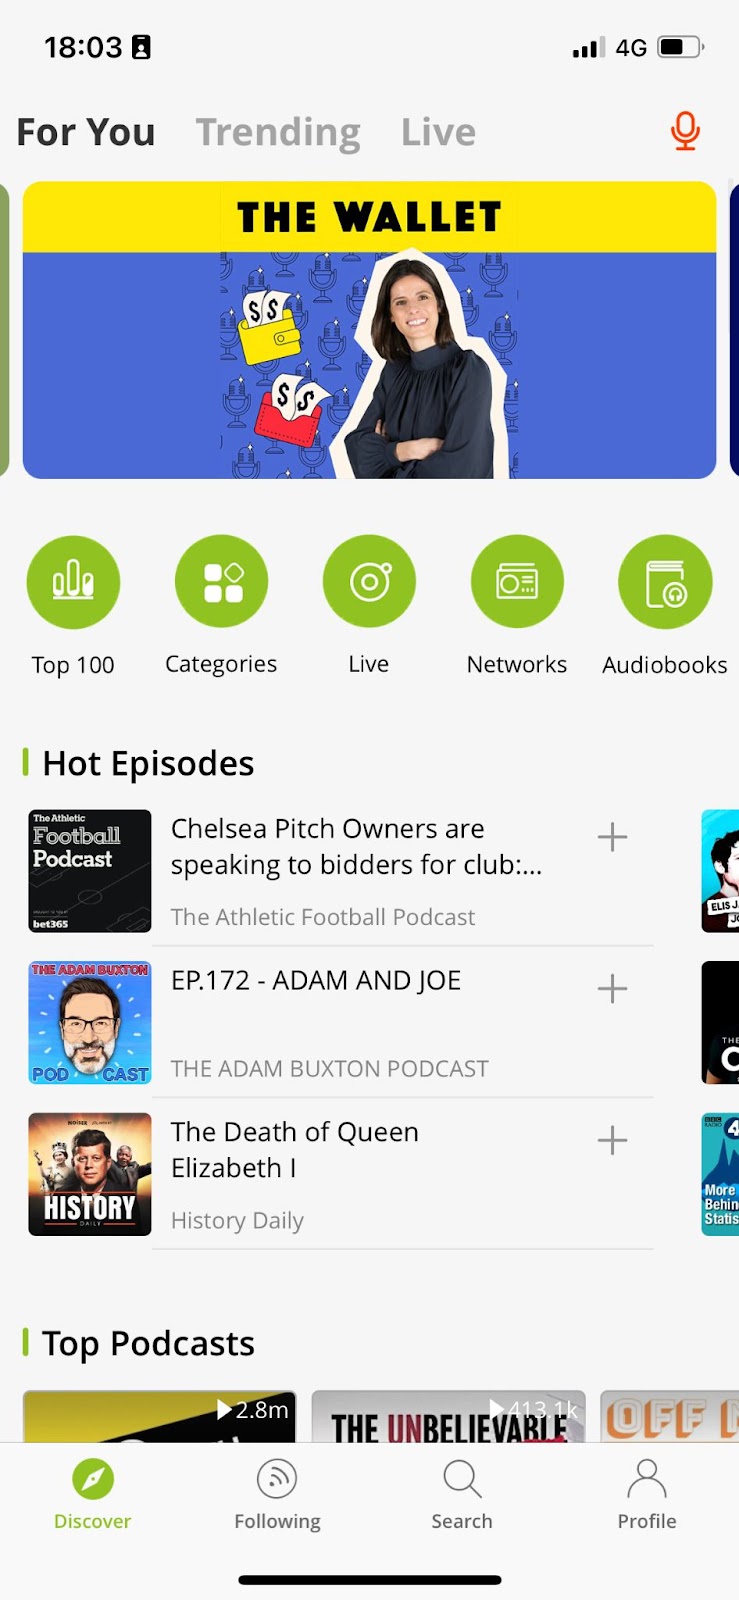 Podbean mobile app For You page.